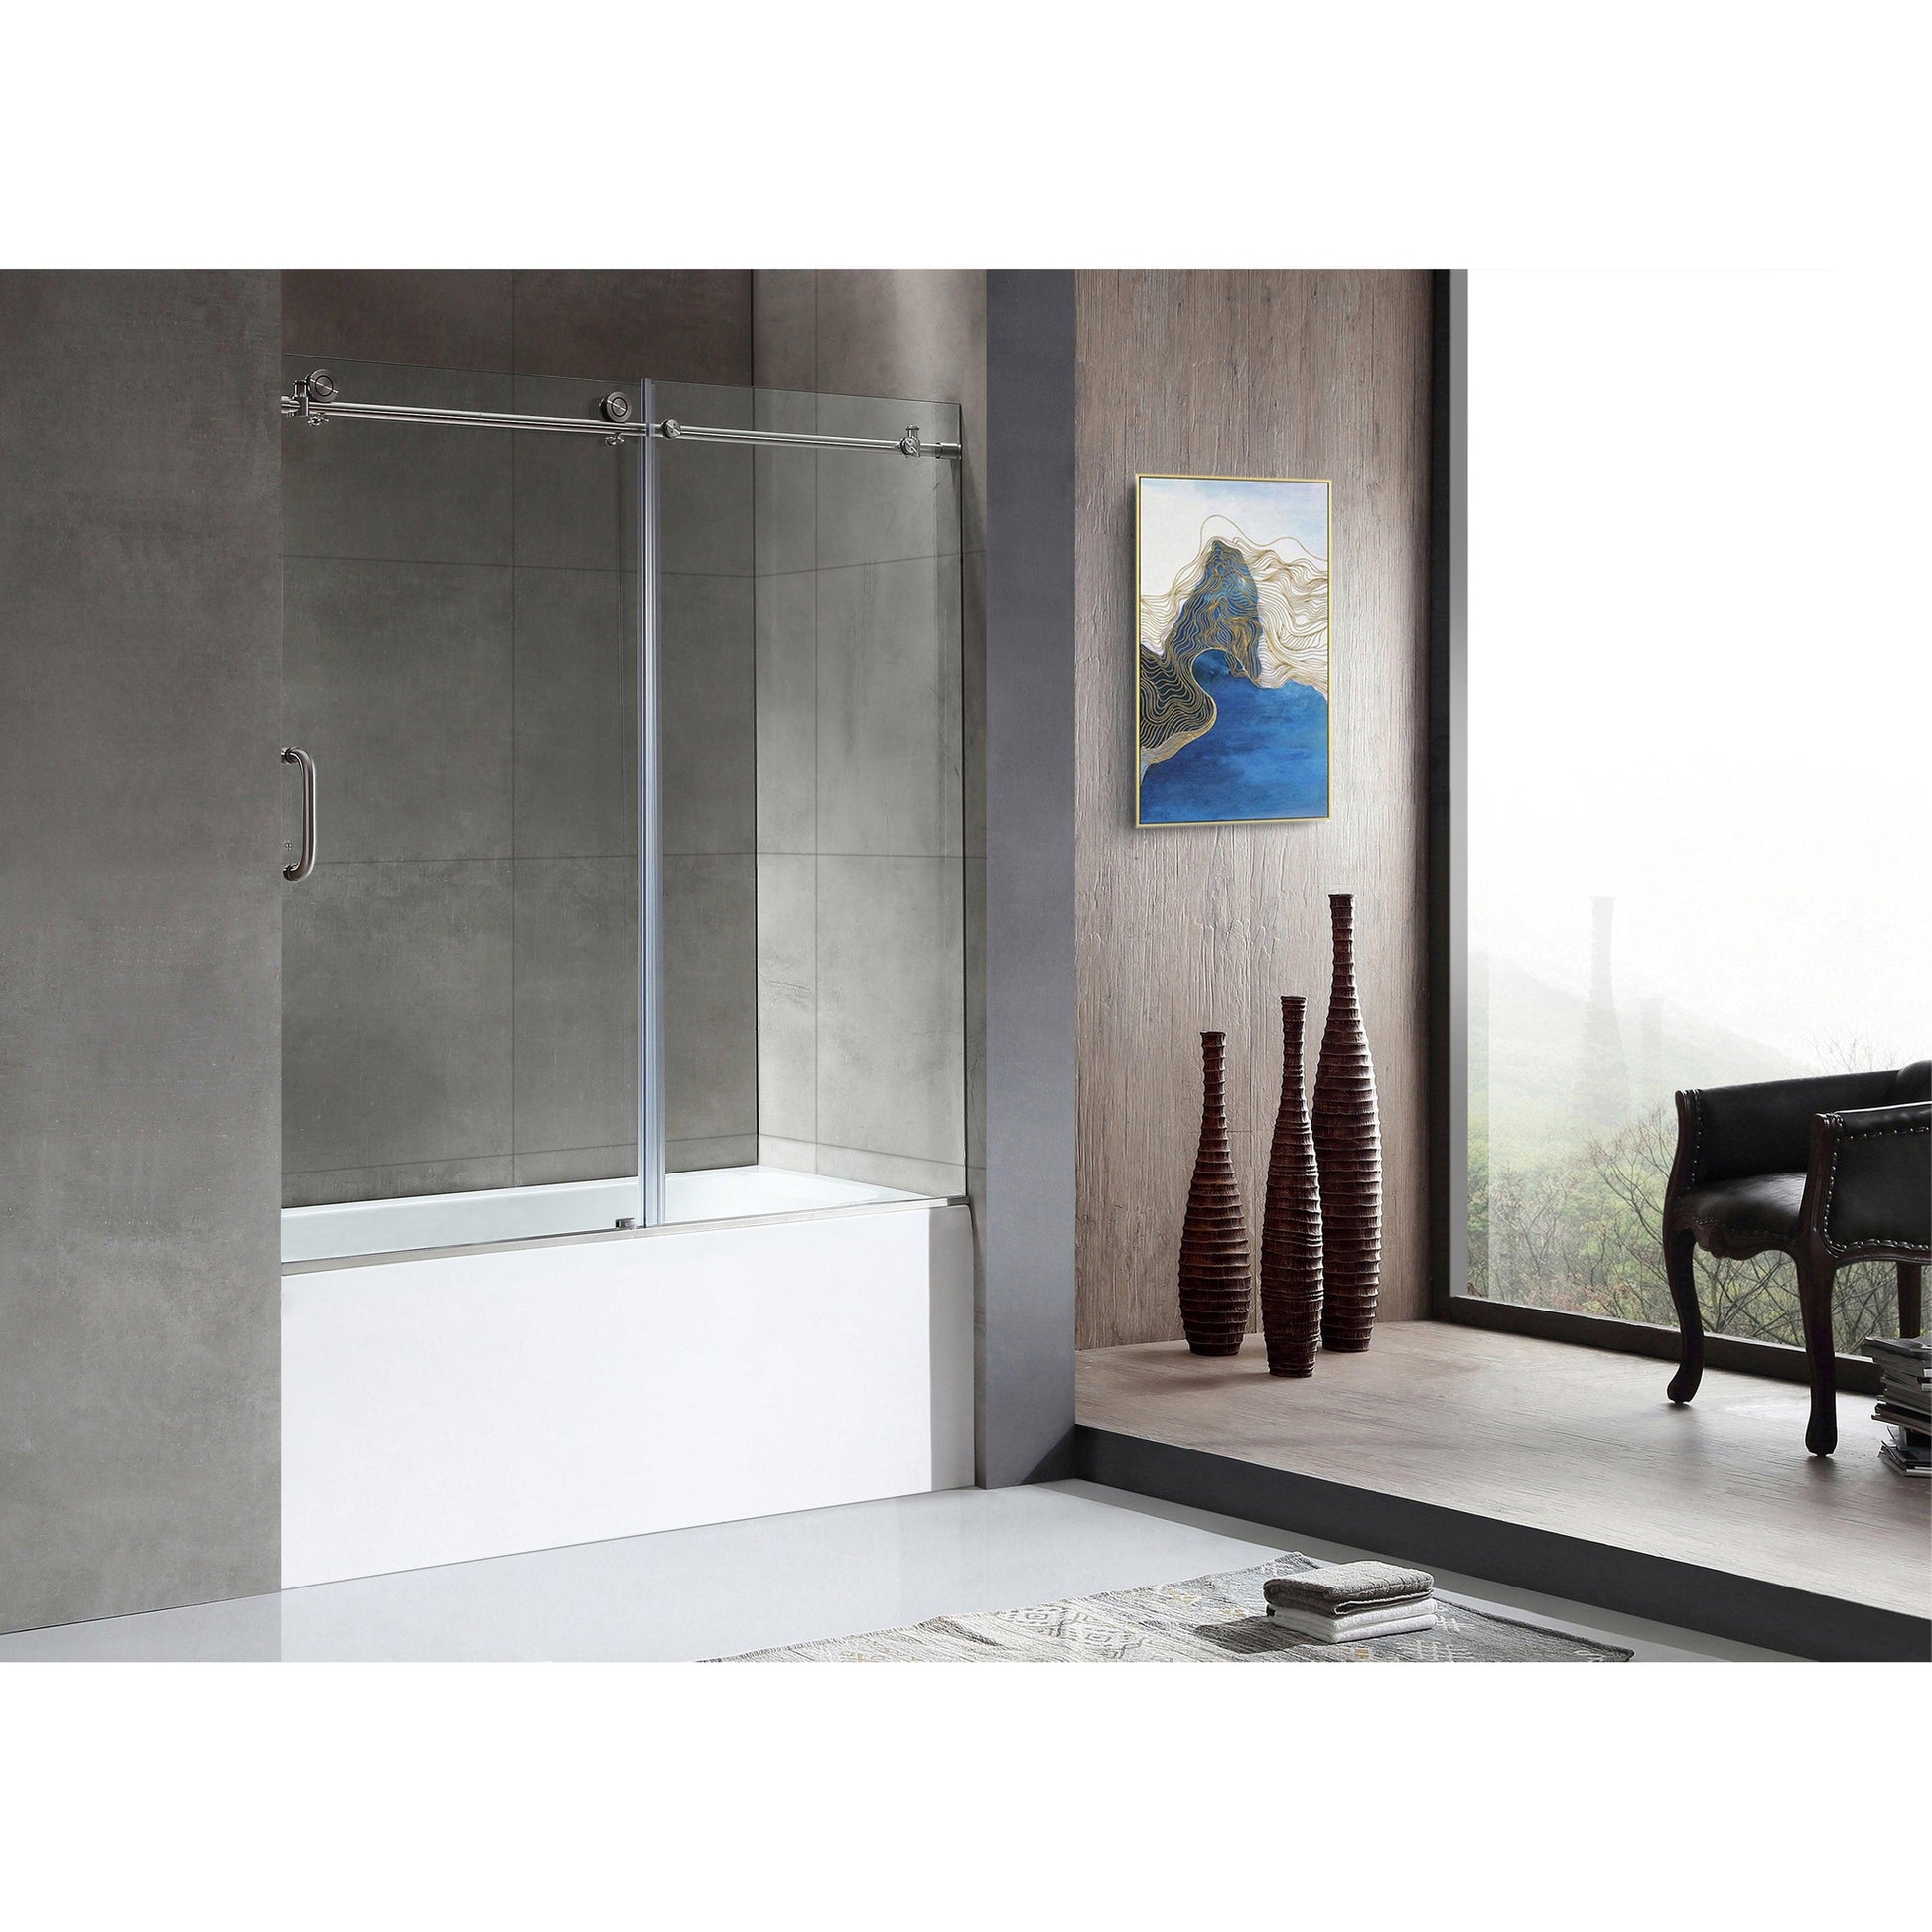 ANZZI Don Series White "60 x 30" Alcove Right Drain Rectangular Bathtub With Built-In Flange and Frameless Brushed Nickel Sliding Door